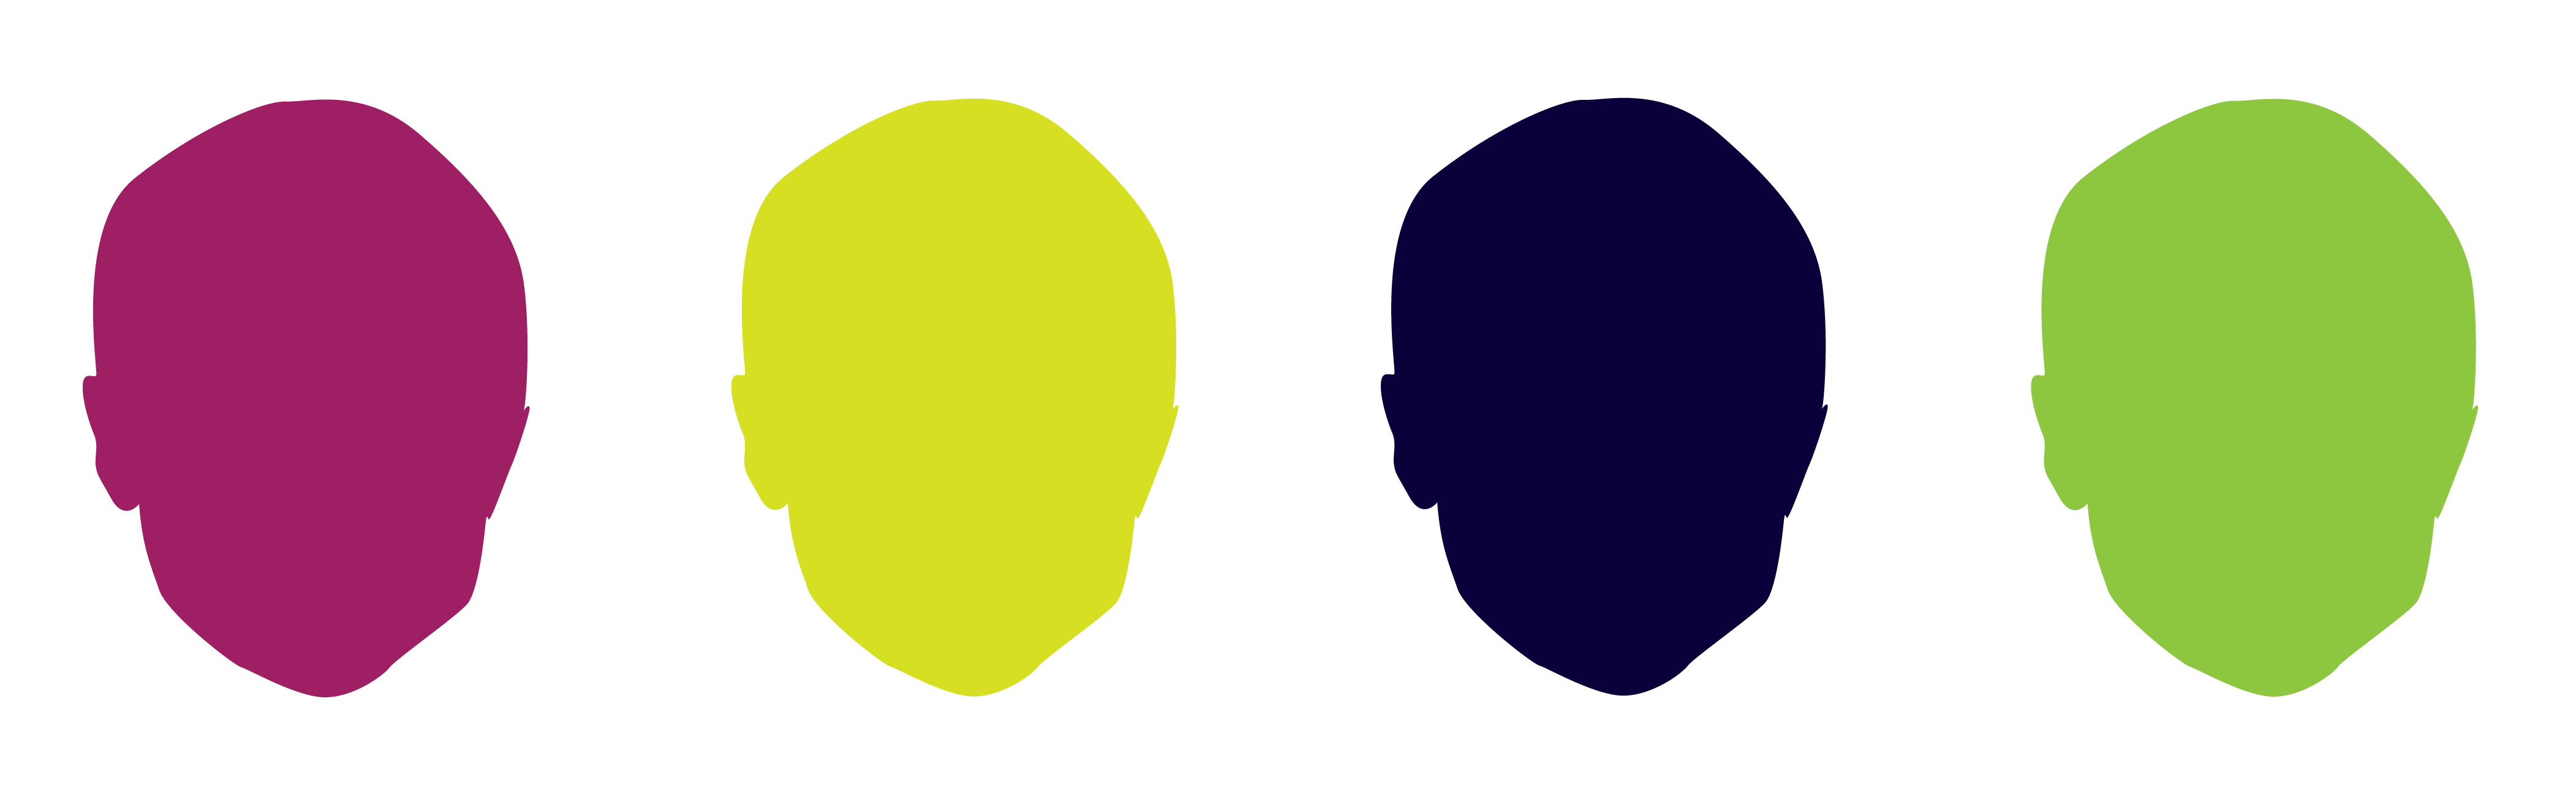 Four human head shapes, pink, yellow, blue, and green.